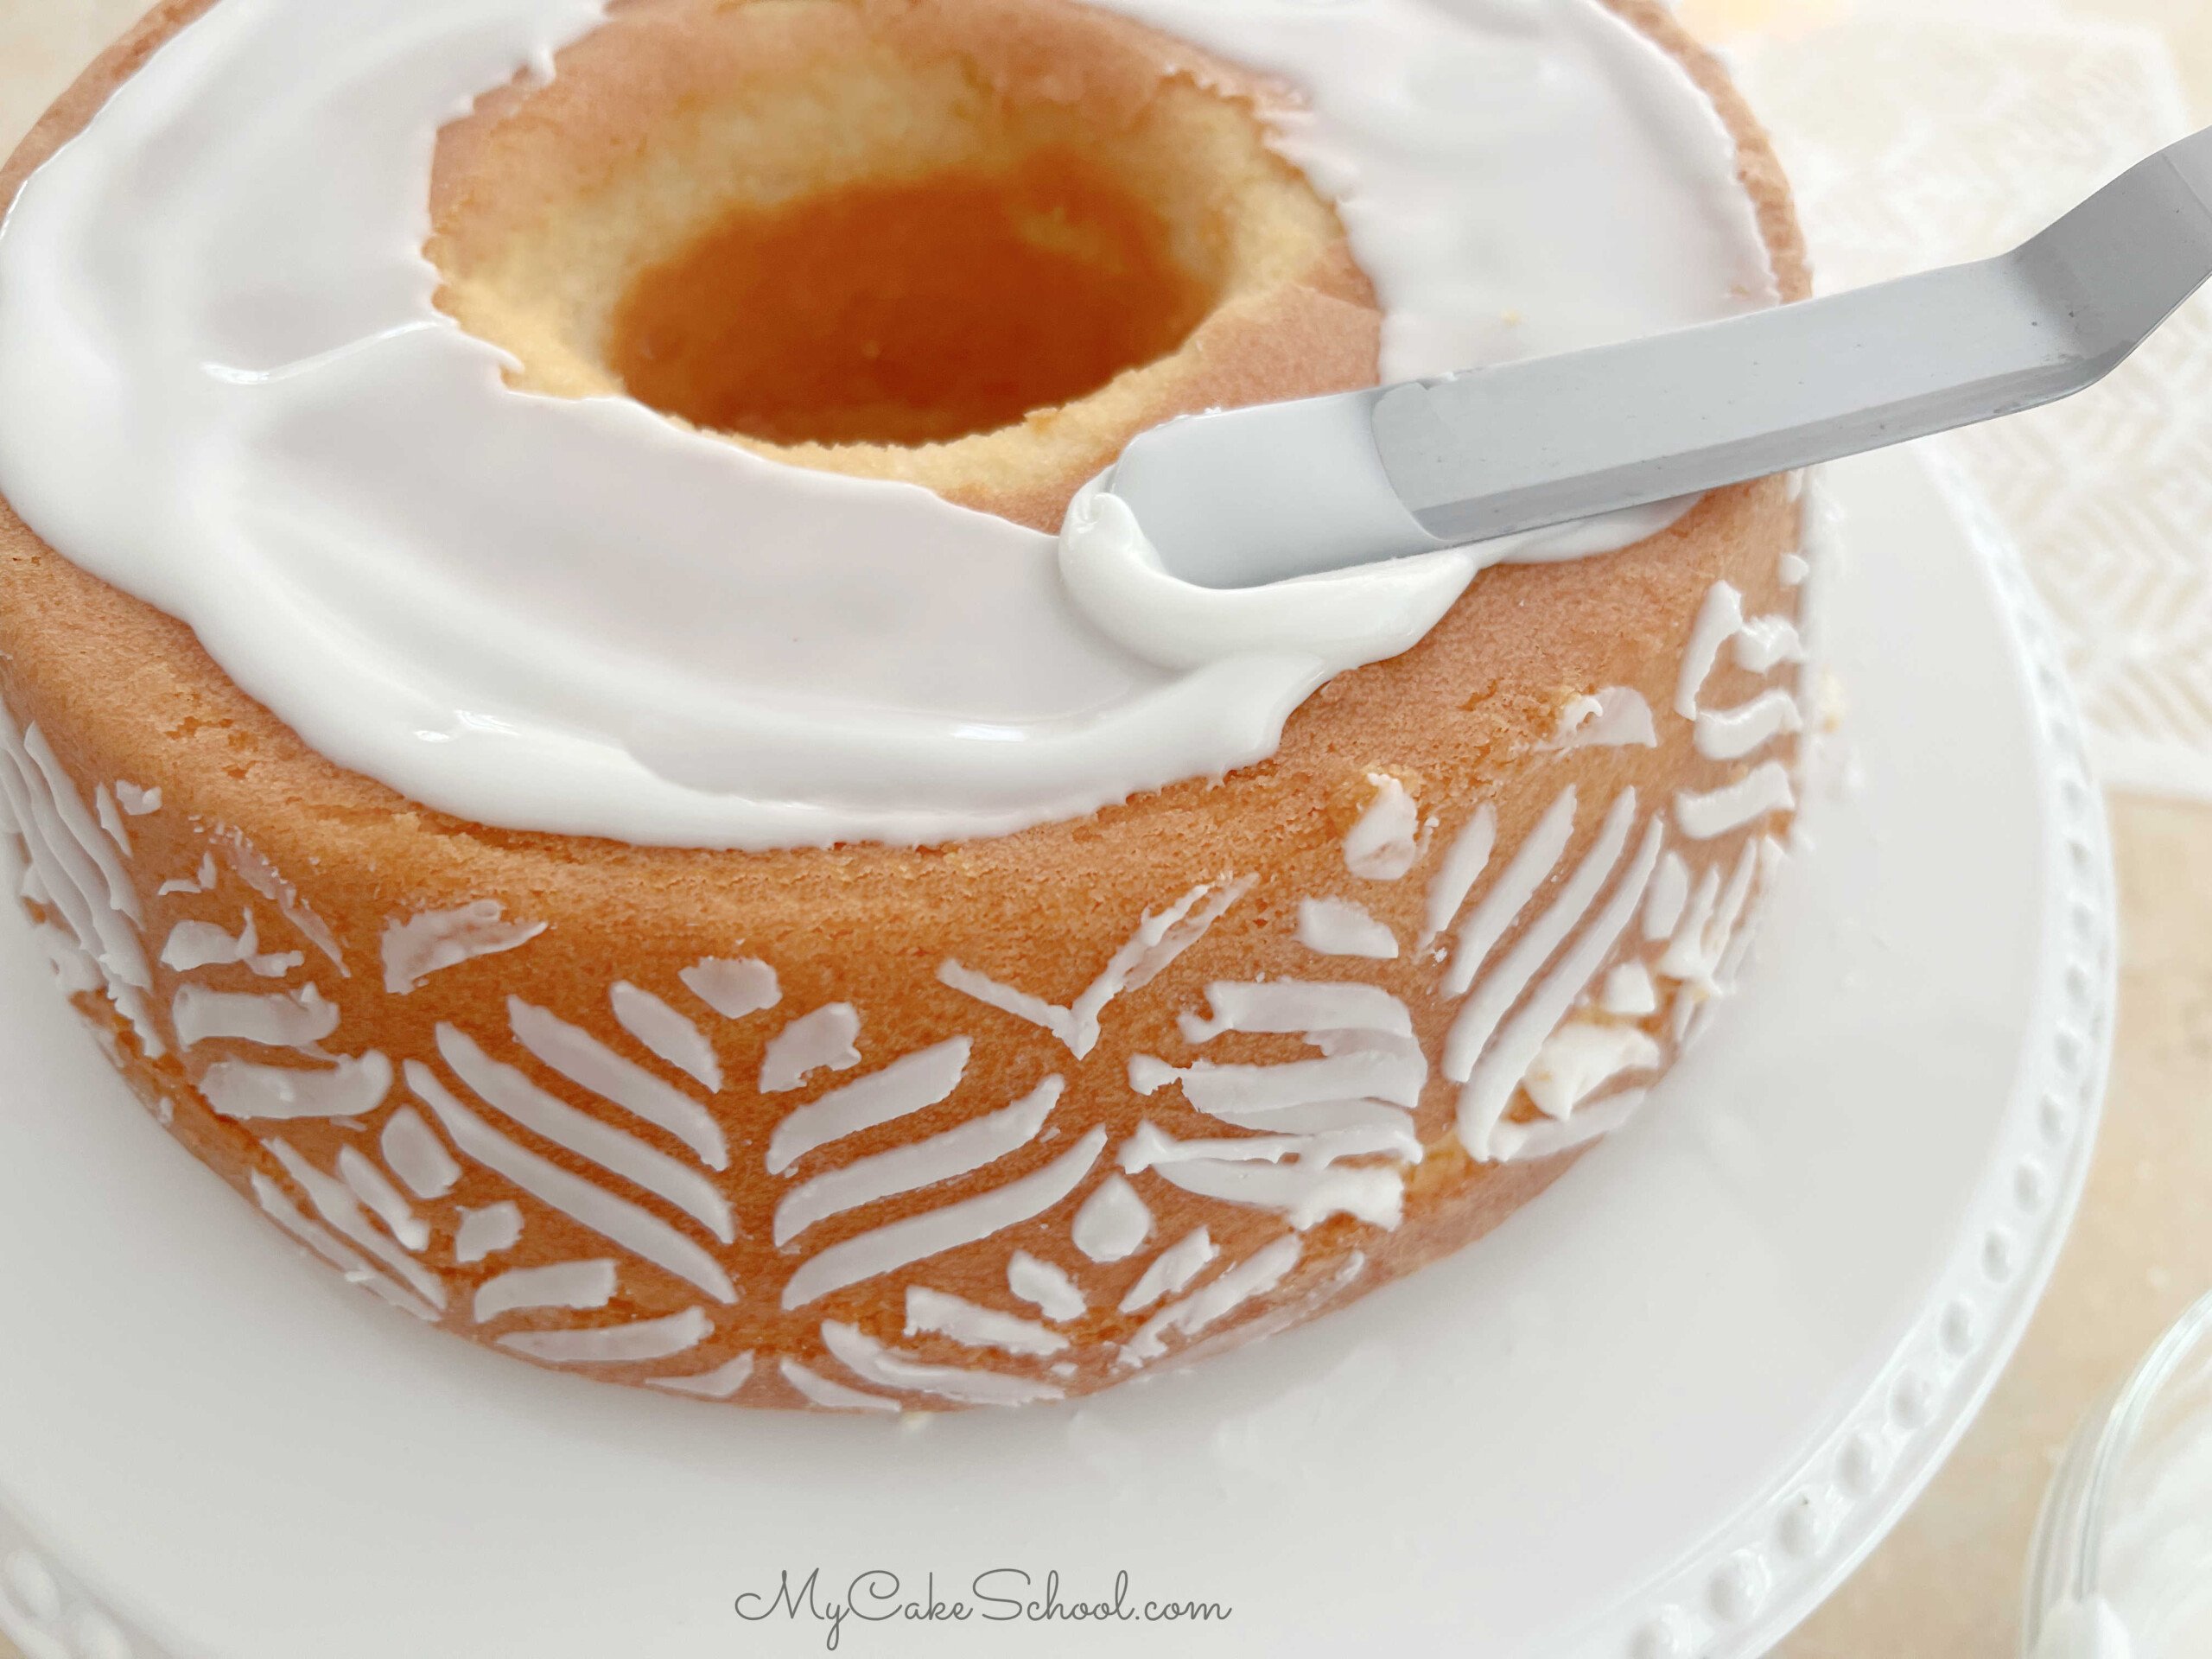 Spreading the top of the pound cake with sugar glaze.